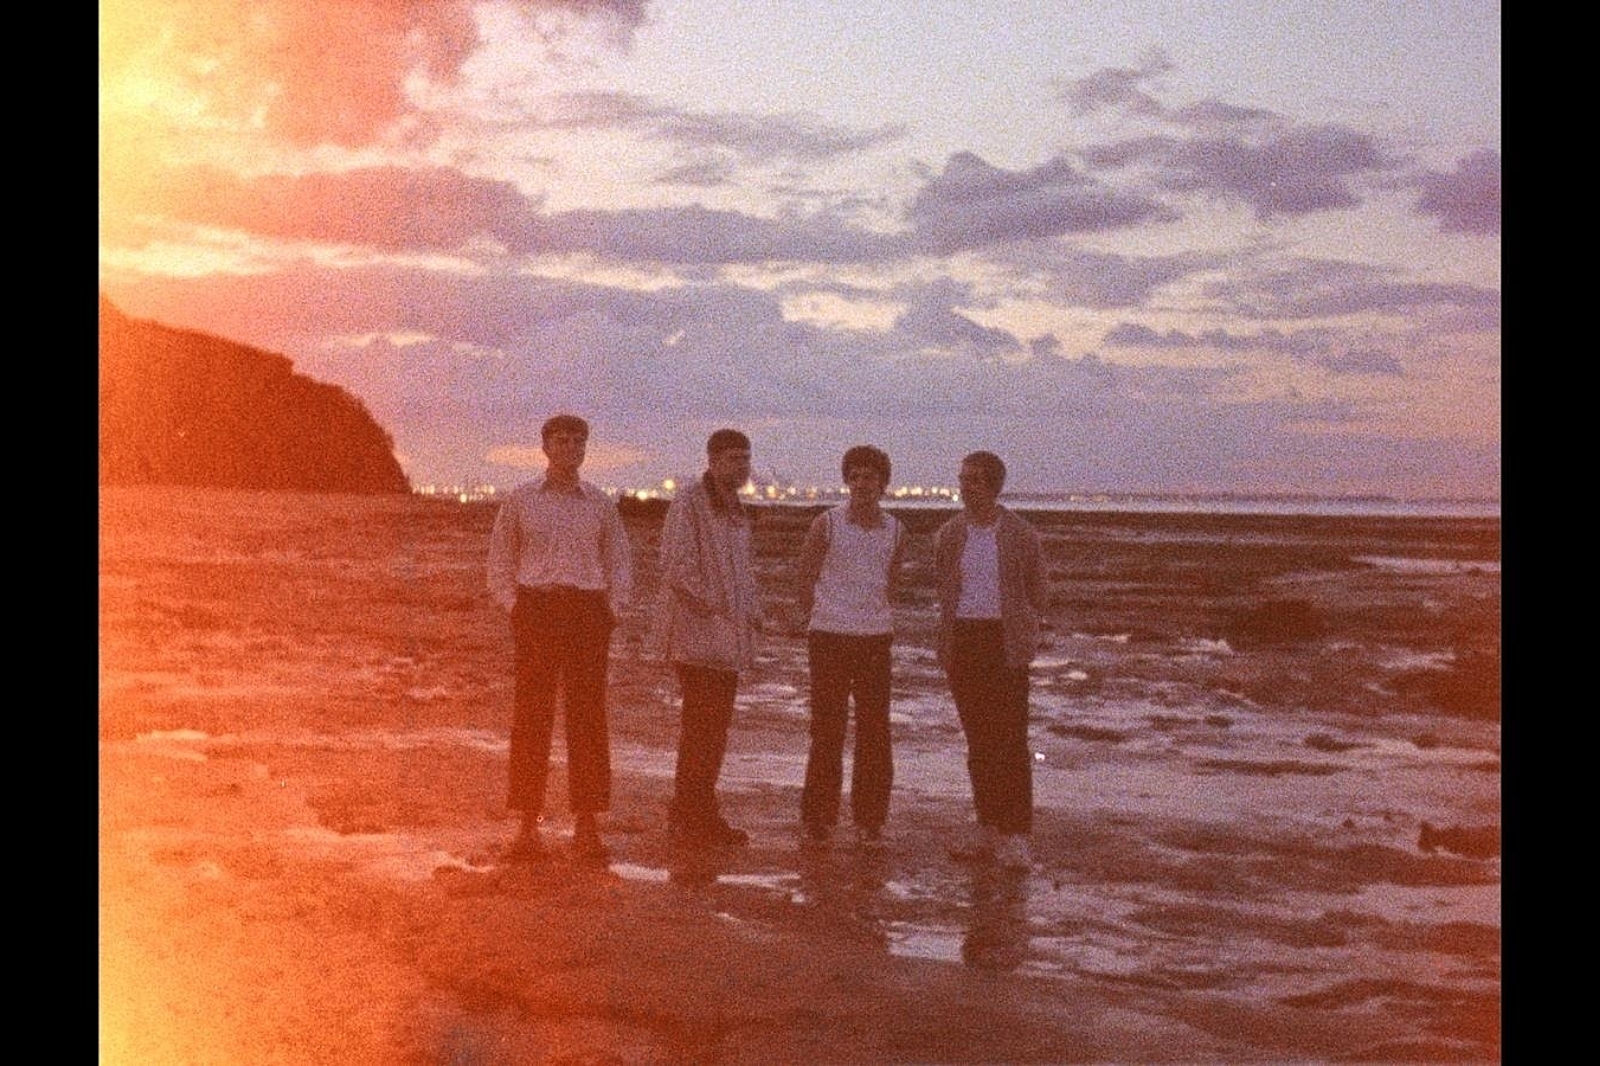 Hotel Lux share 'Ballad of You & I'